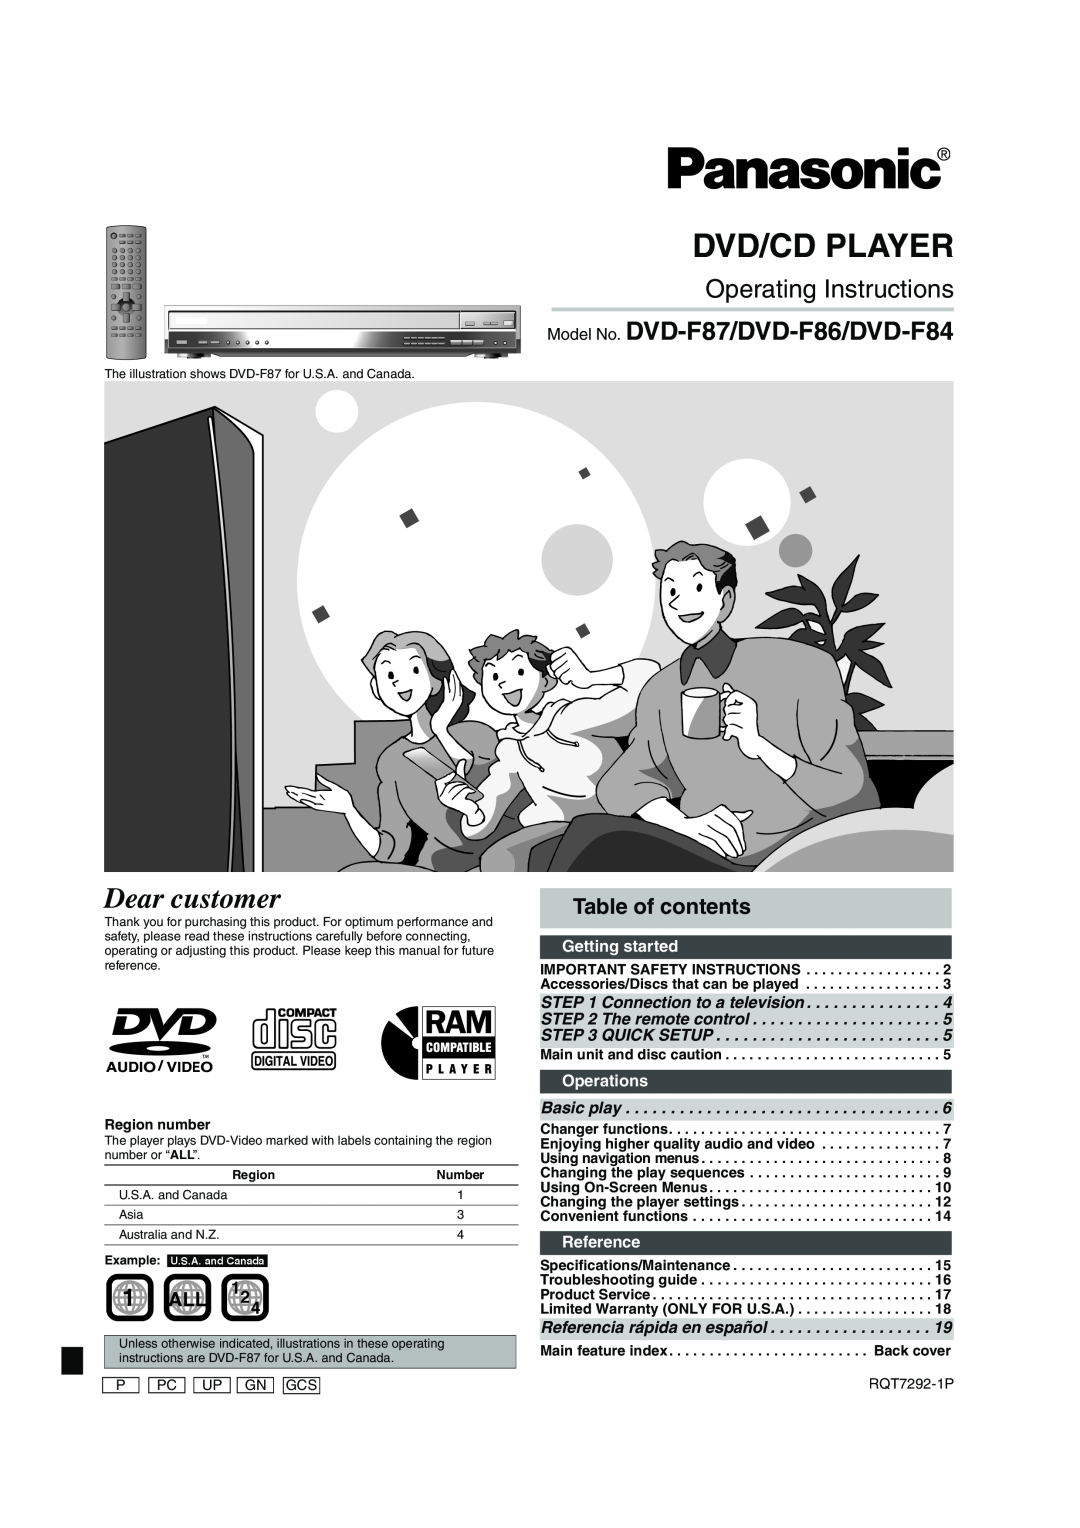 Panasonic DVD-F84 important safety instructions Table of contents, 1 ALL, Dvd/Cd Player, Dear customer, Getting started 